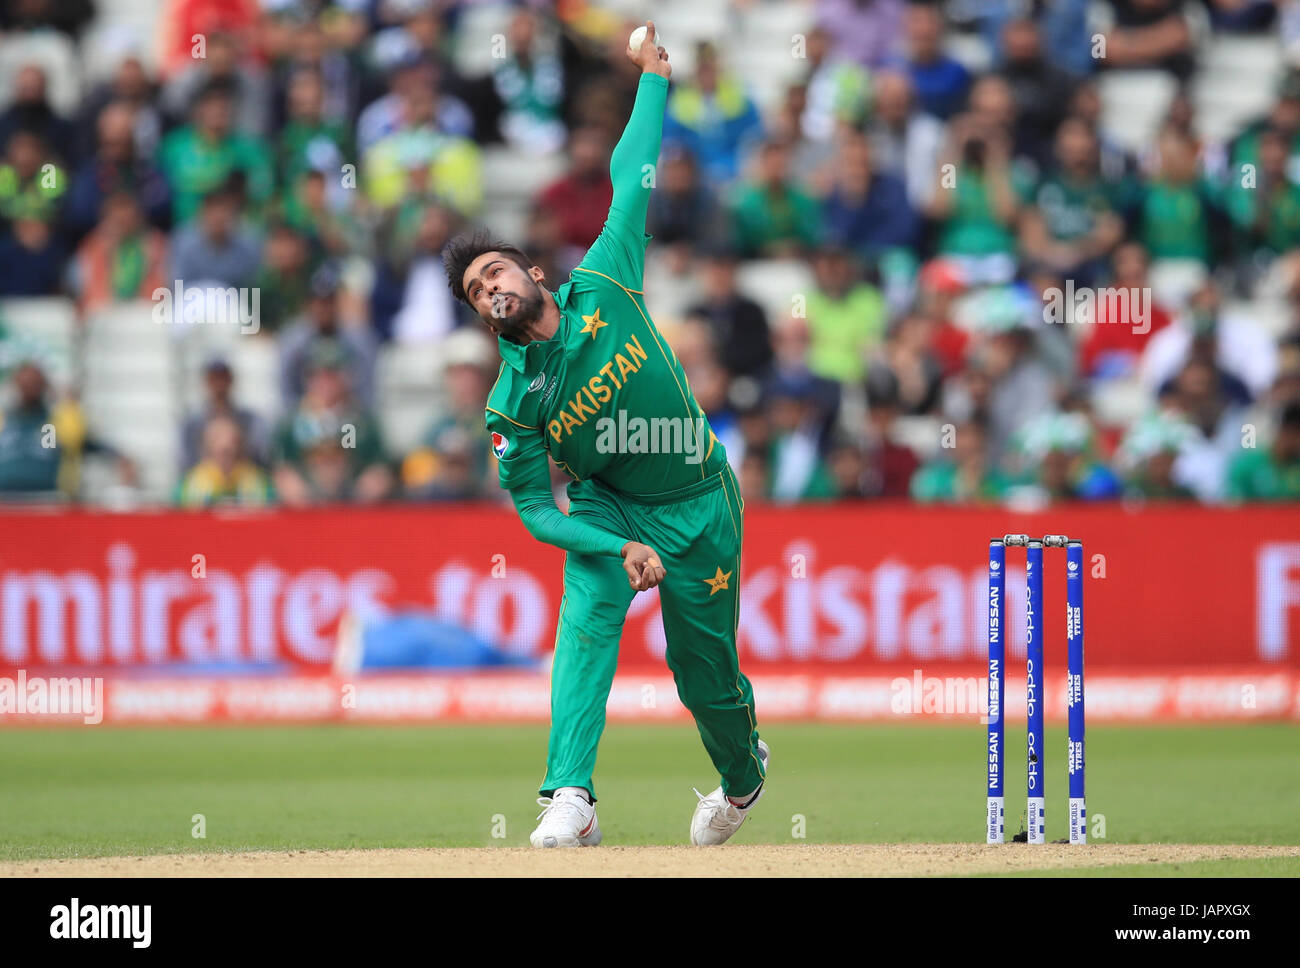 Mohammad Amir Stock Photos Mohammad Amir Stock Images Alamy Images, Photos, Reviews